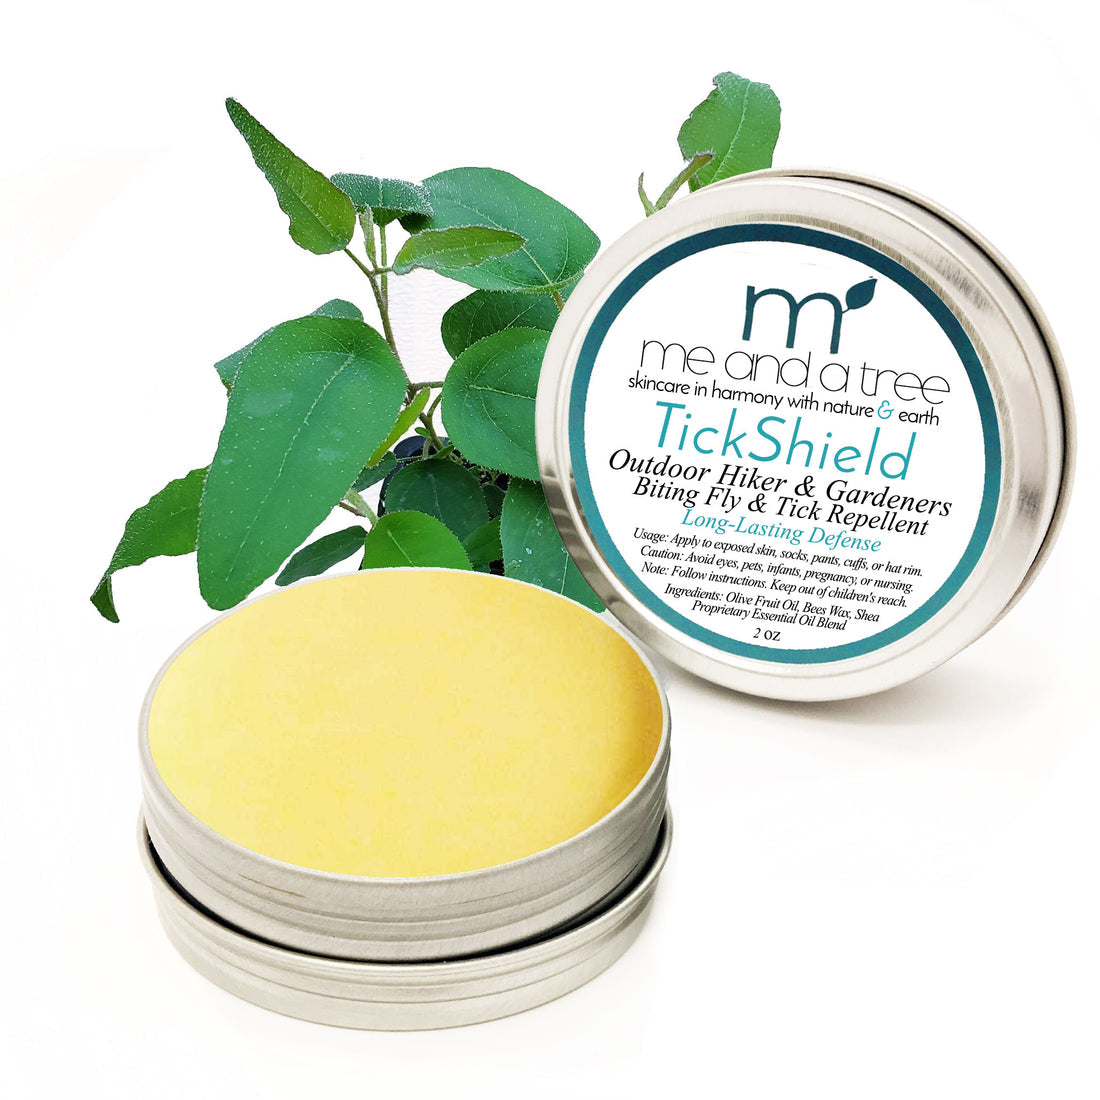 Convenient easy carry Tick Repellent Tin made by Me and a Tree natural skincare company